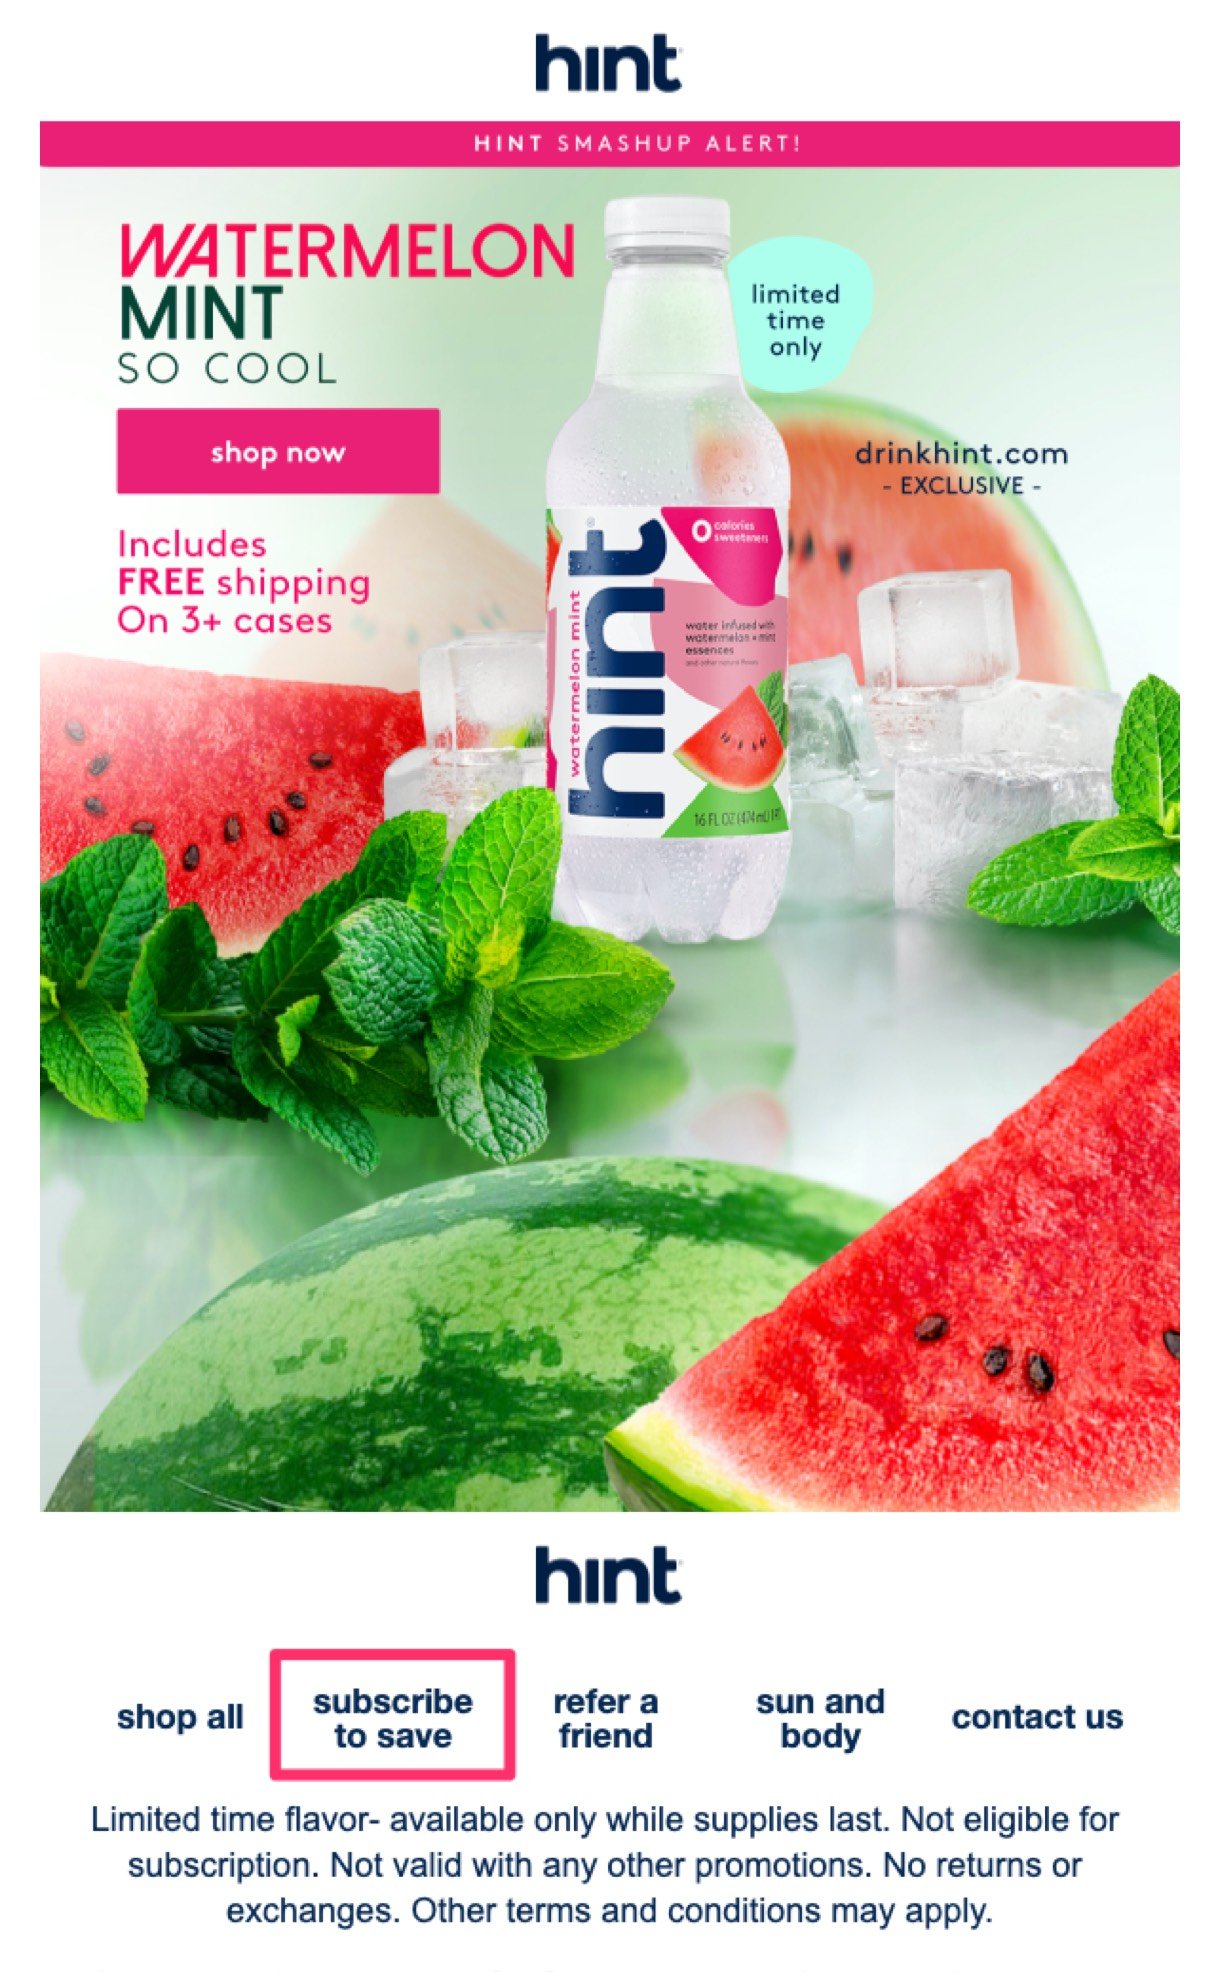 hint water email subscriber community invitation